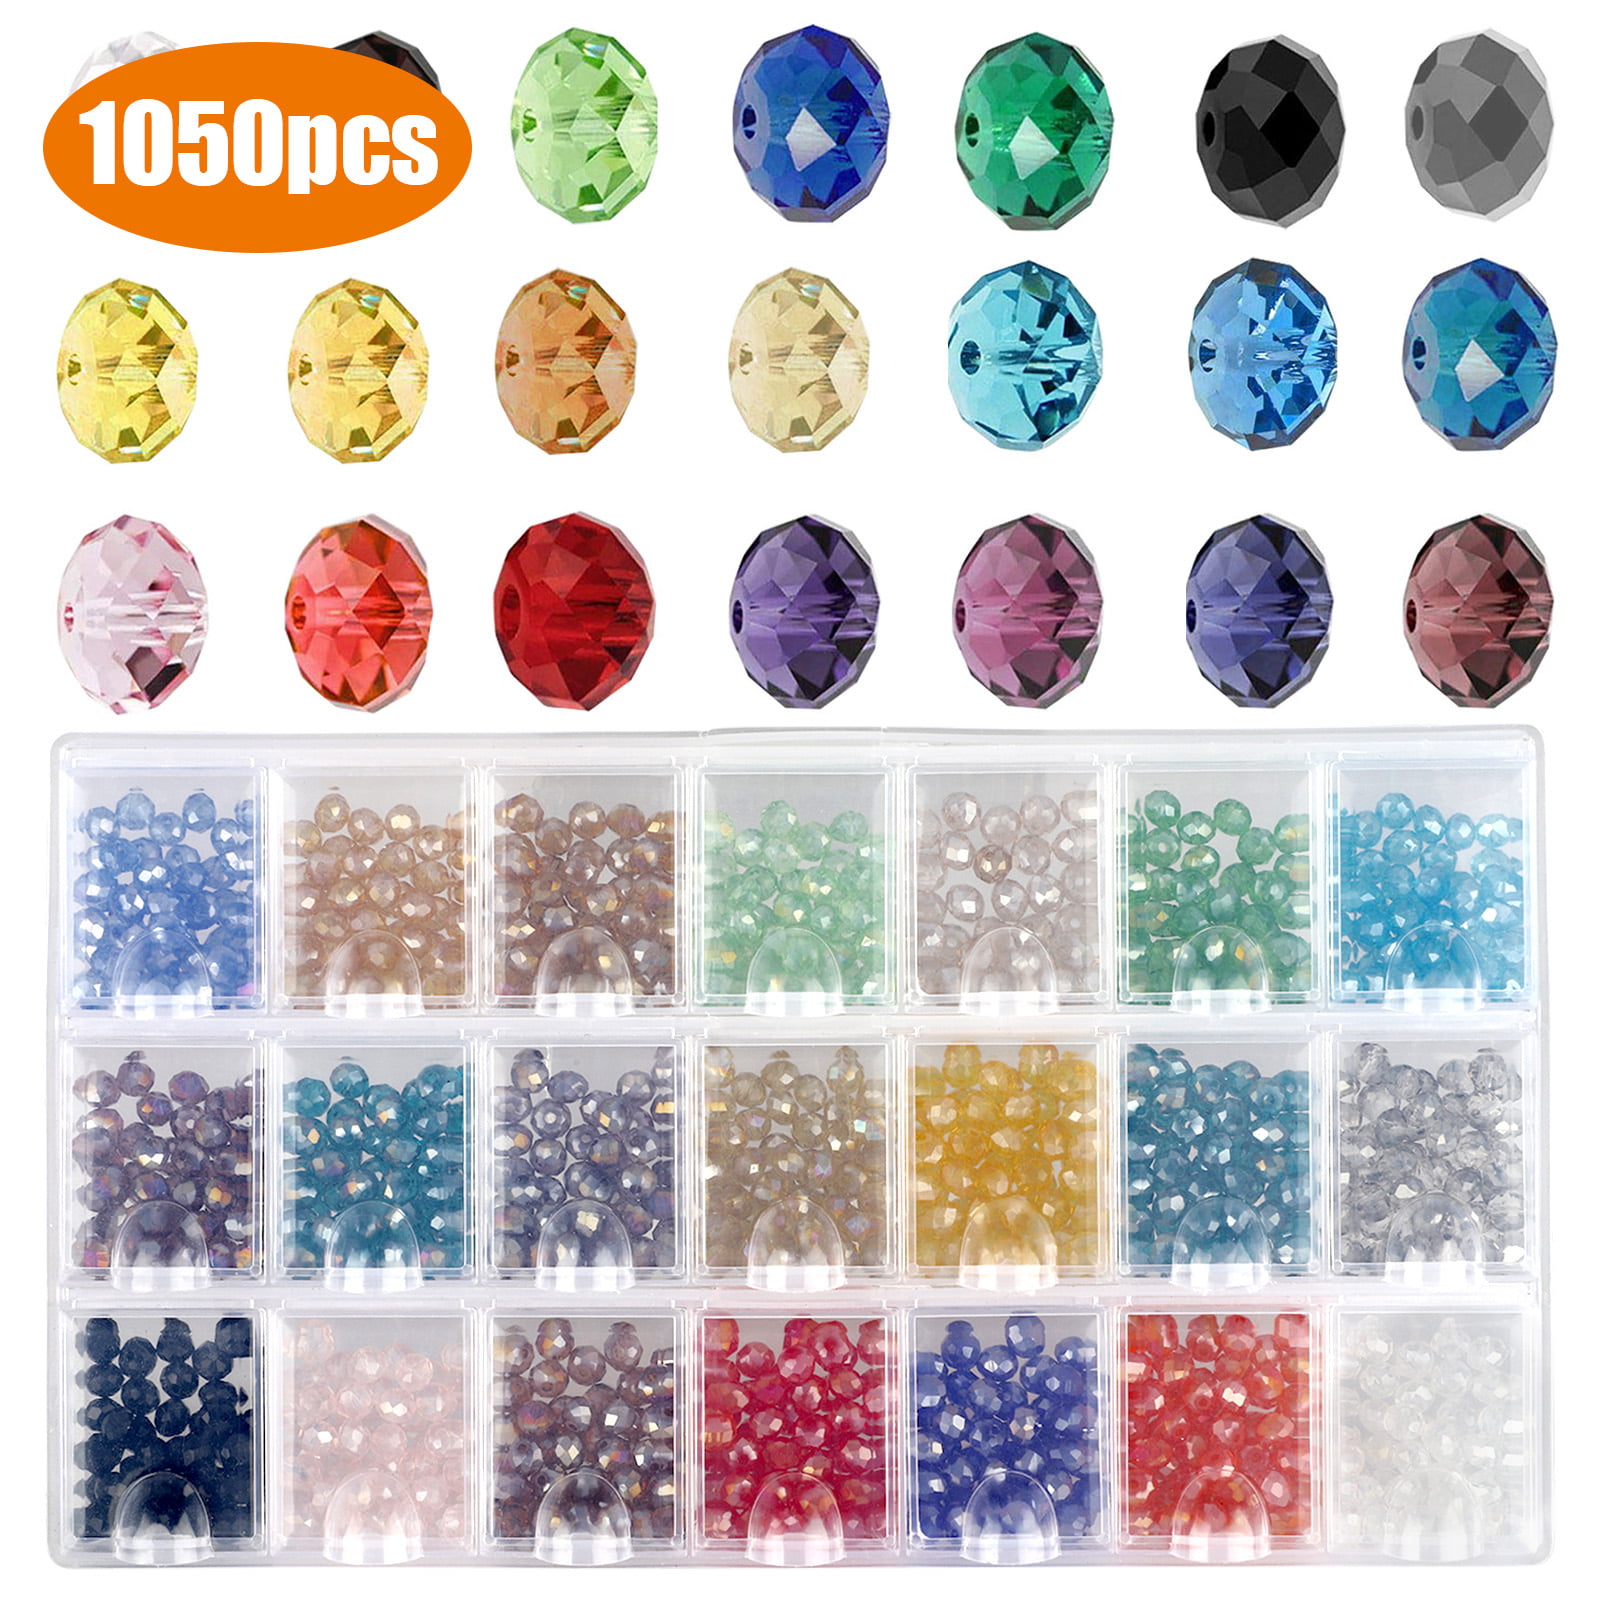 100pcs 6mm Chamr Rondelle Faceted Crystal Glass Spacer Loose DIY Beads Necklace